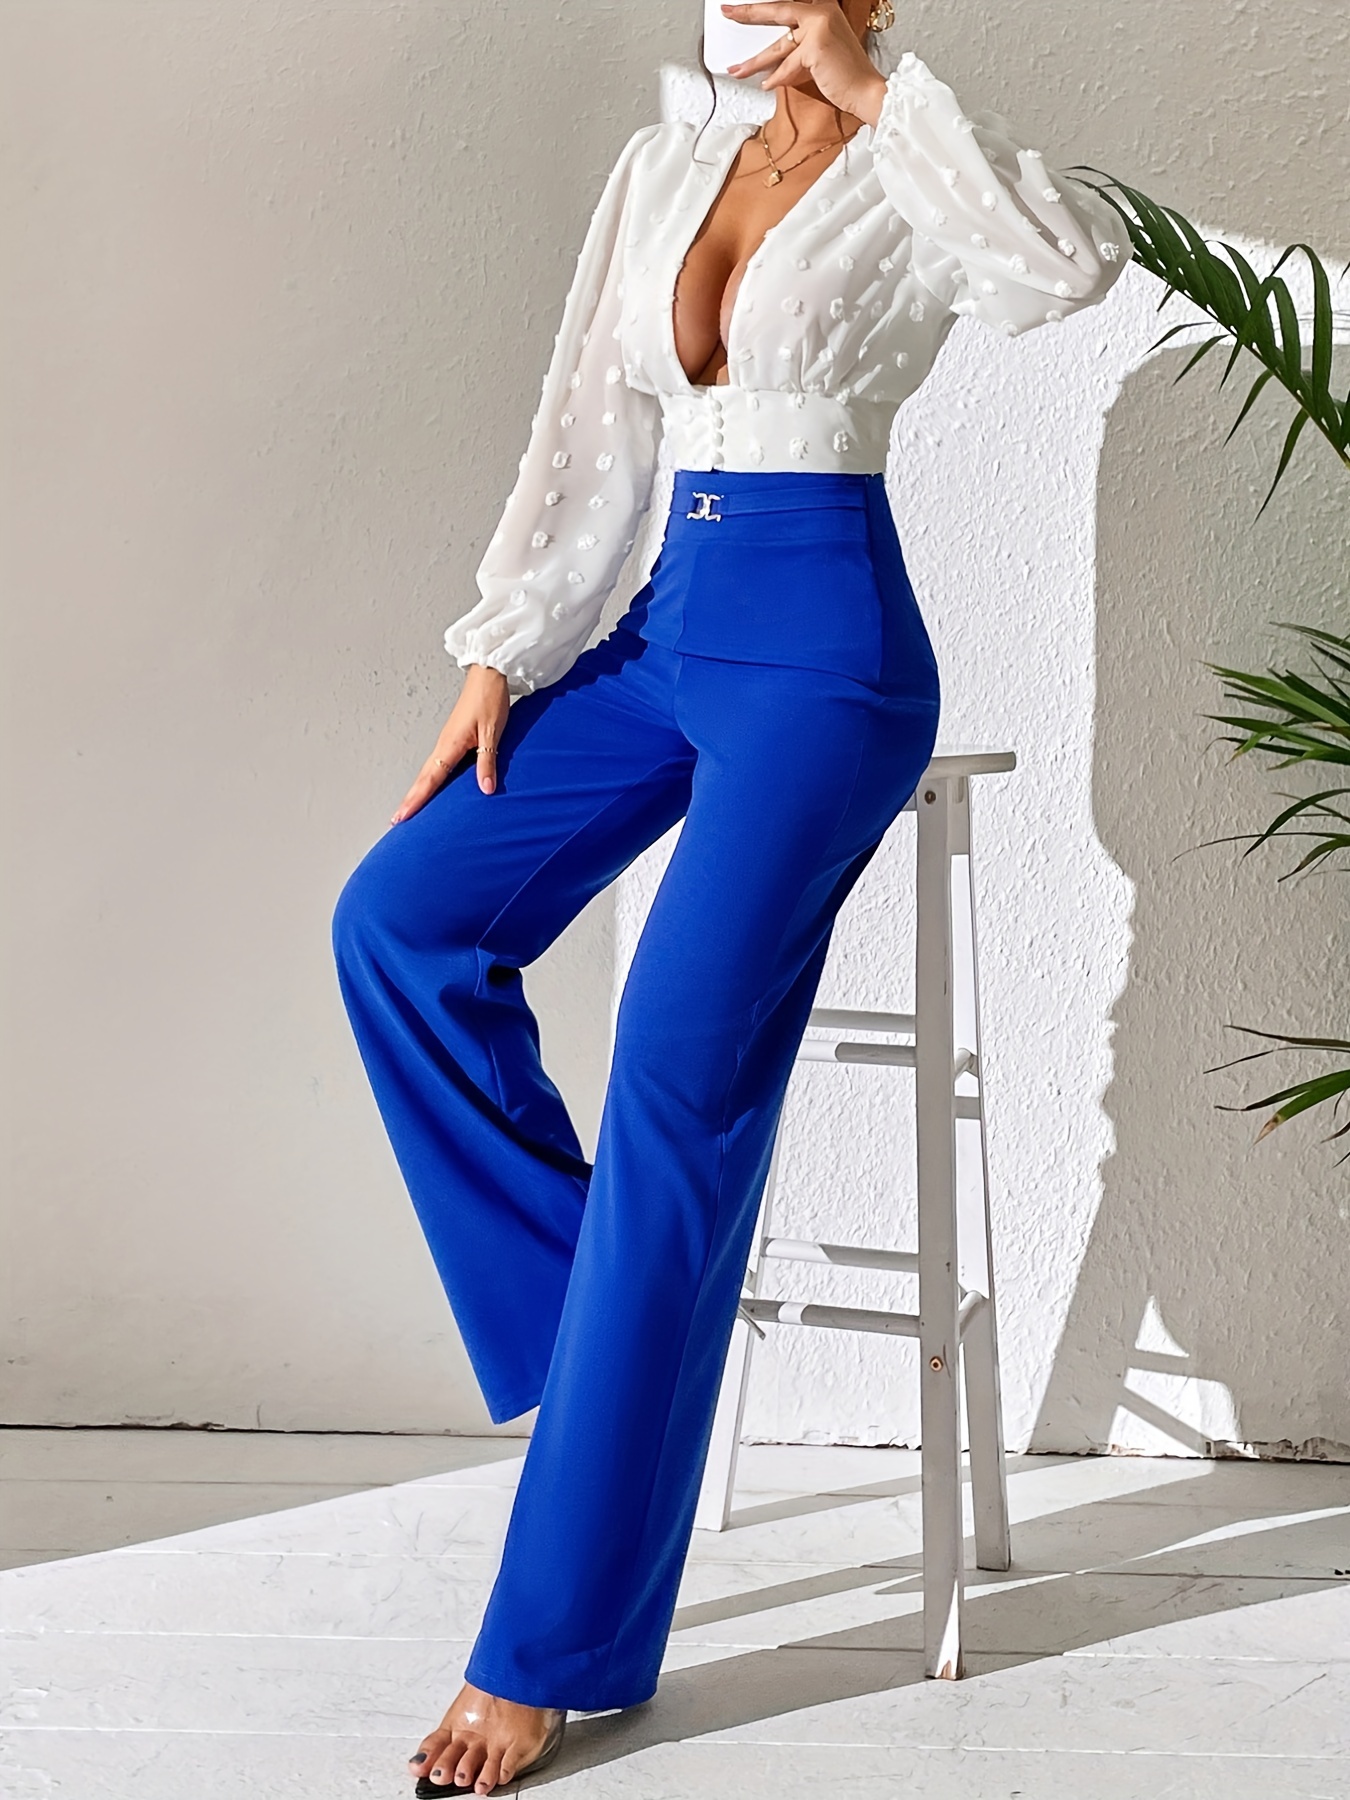 High Waisted Pants Office Look - Beautifully Candid